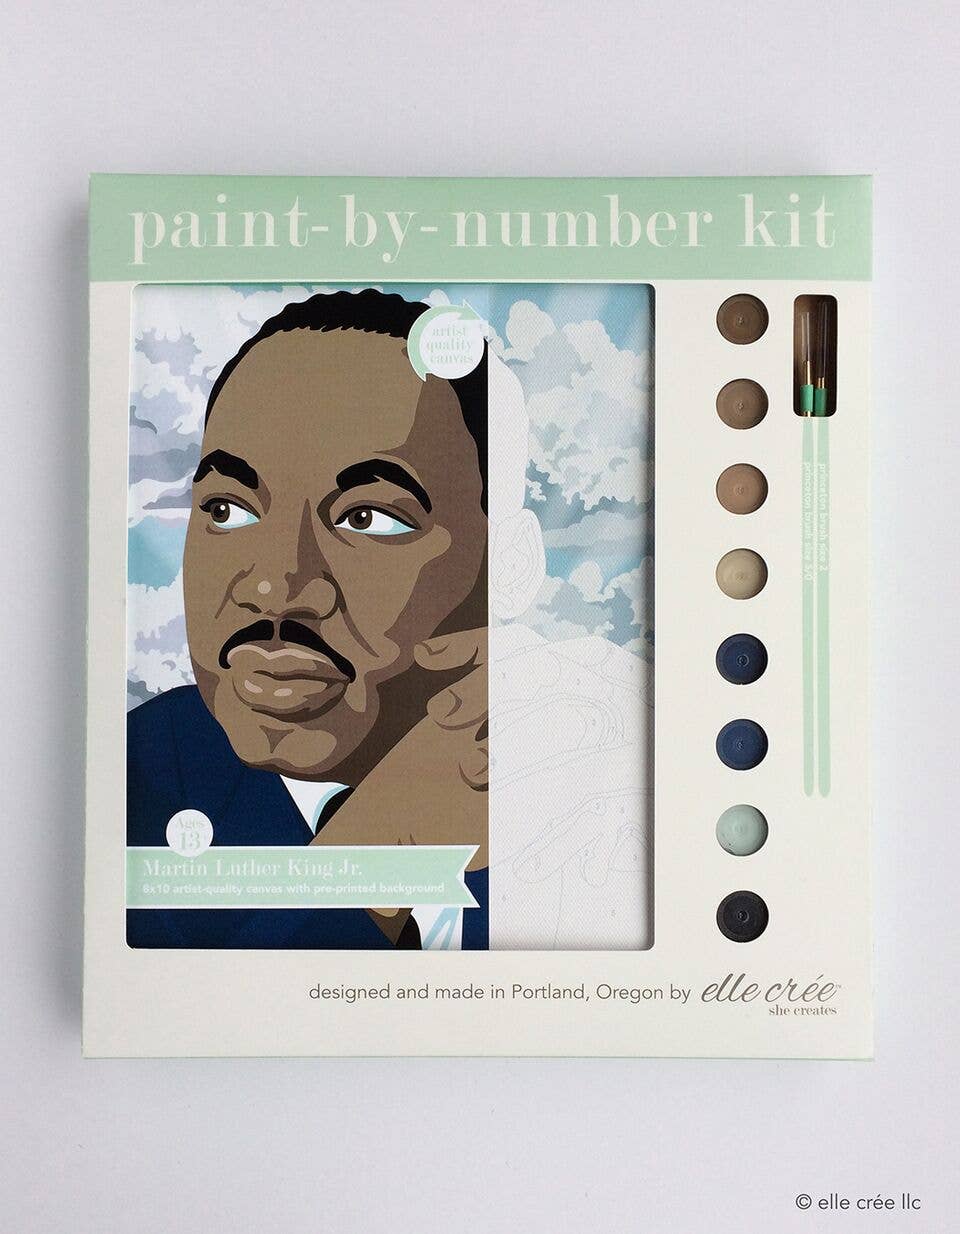 Fox with Chicory | Paint-by-Number Kit for Adults — Elle Crée (she creates)